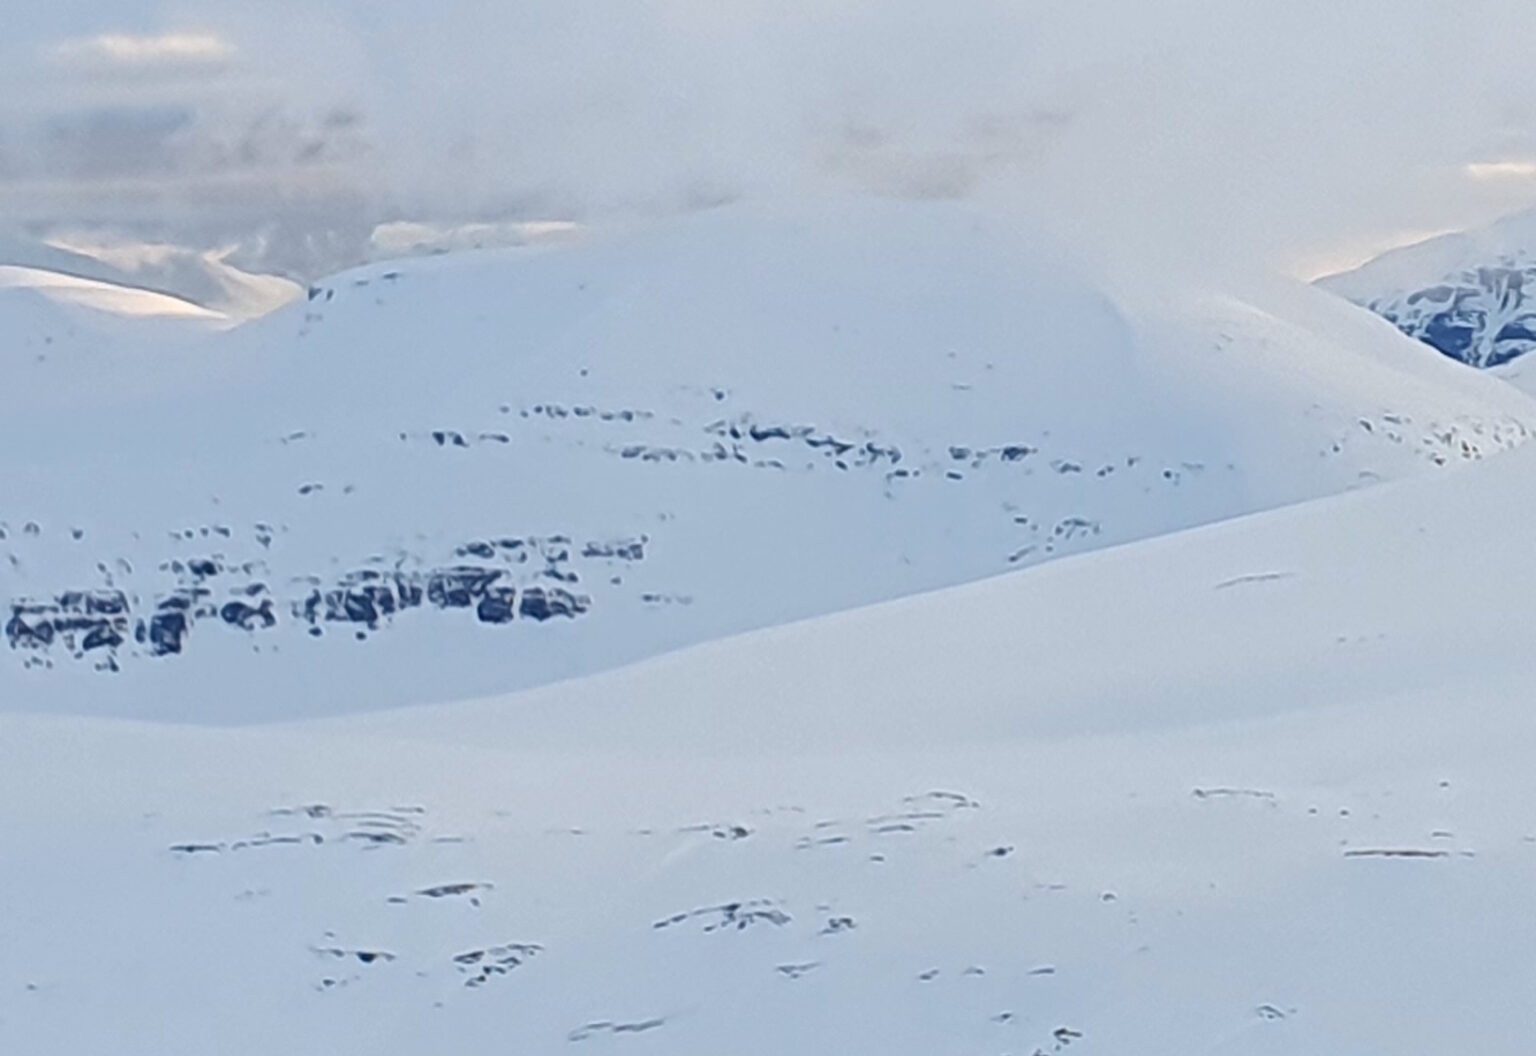 A closer look at the Eastern bowl of Brattlifjellet